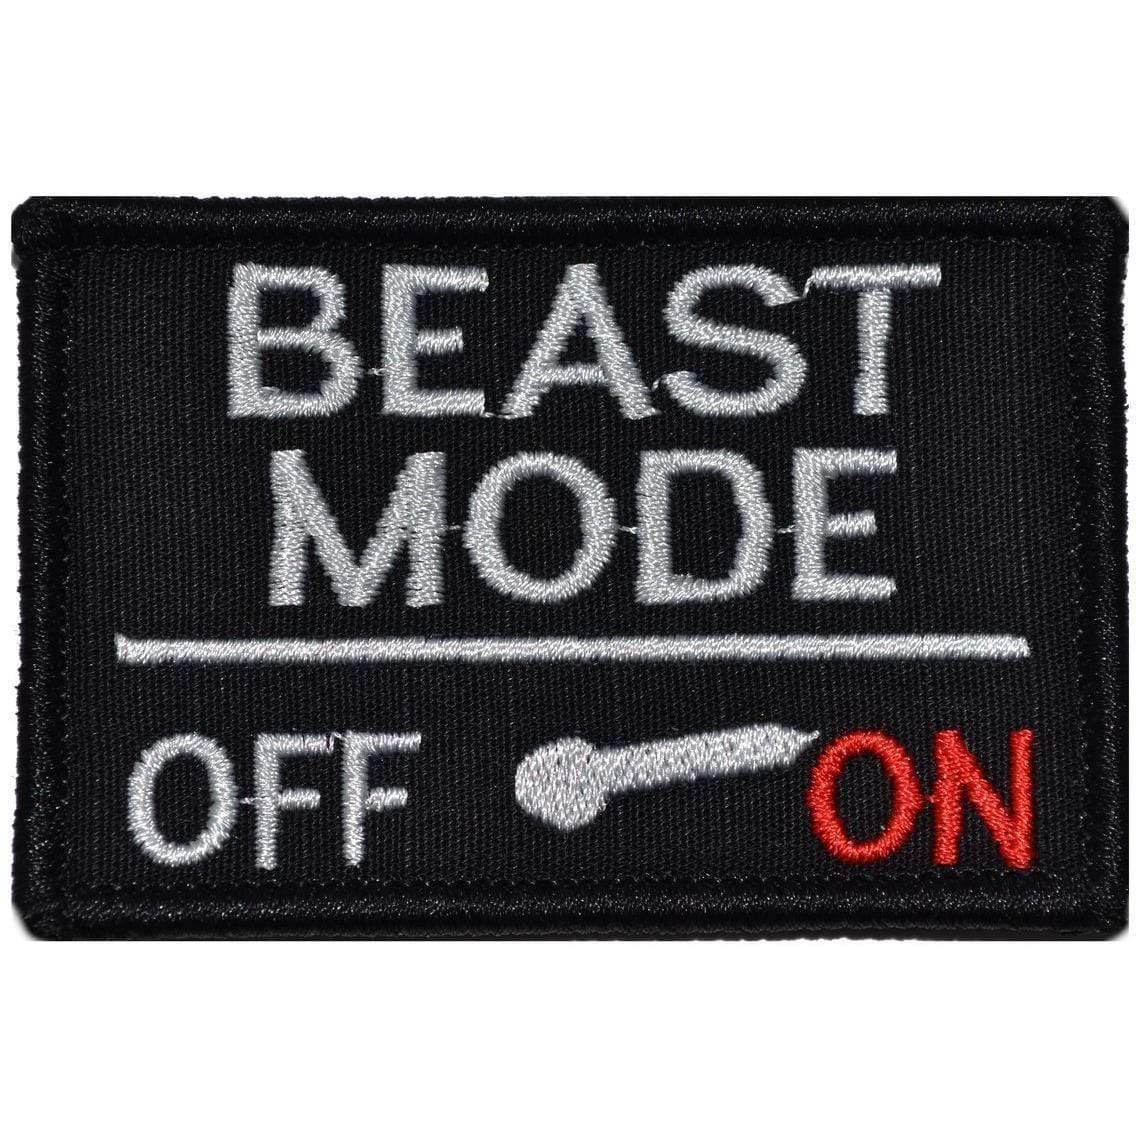 Tactical Gear Junkie Patches Black BEAST MODE Activated - 2x3 Patch